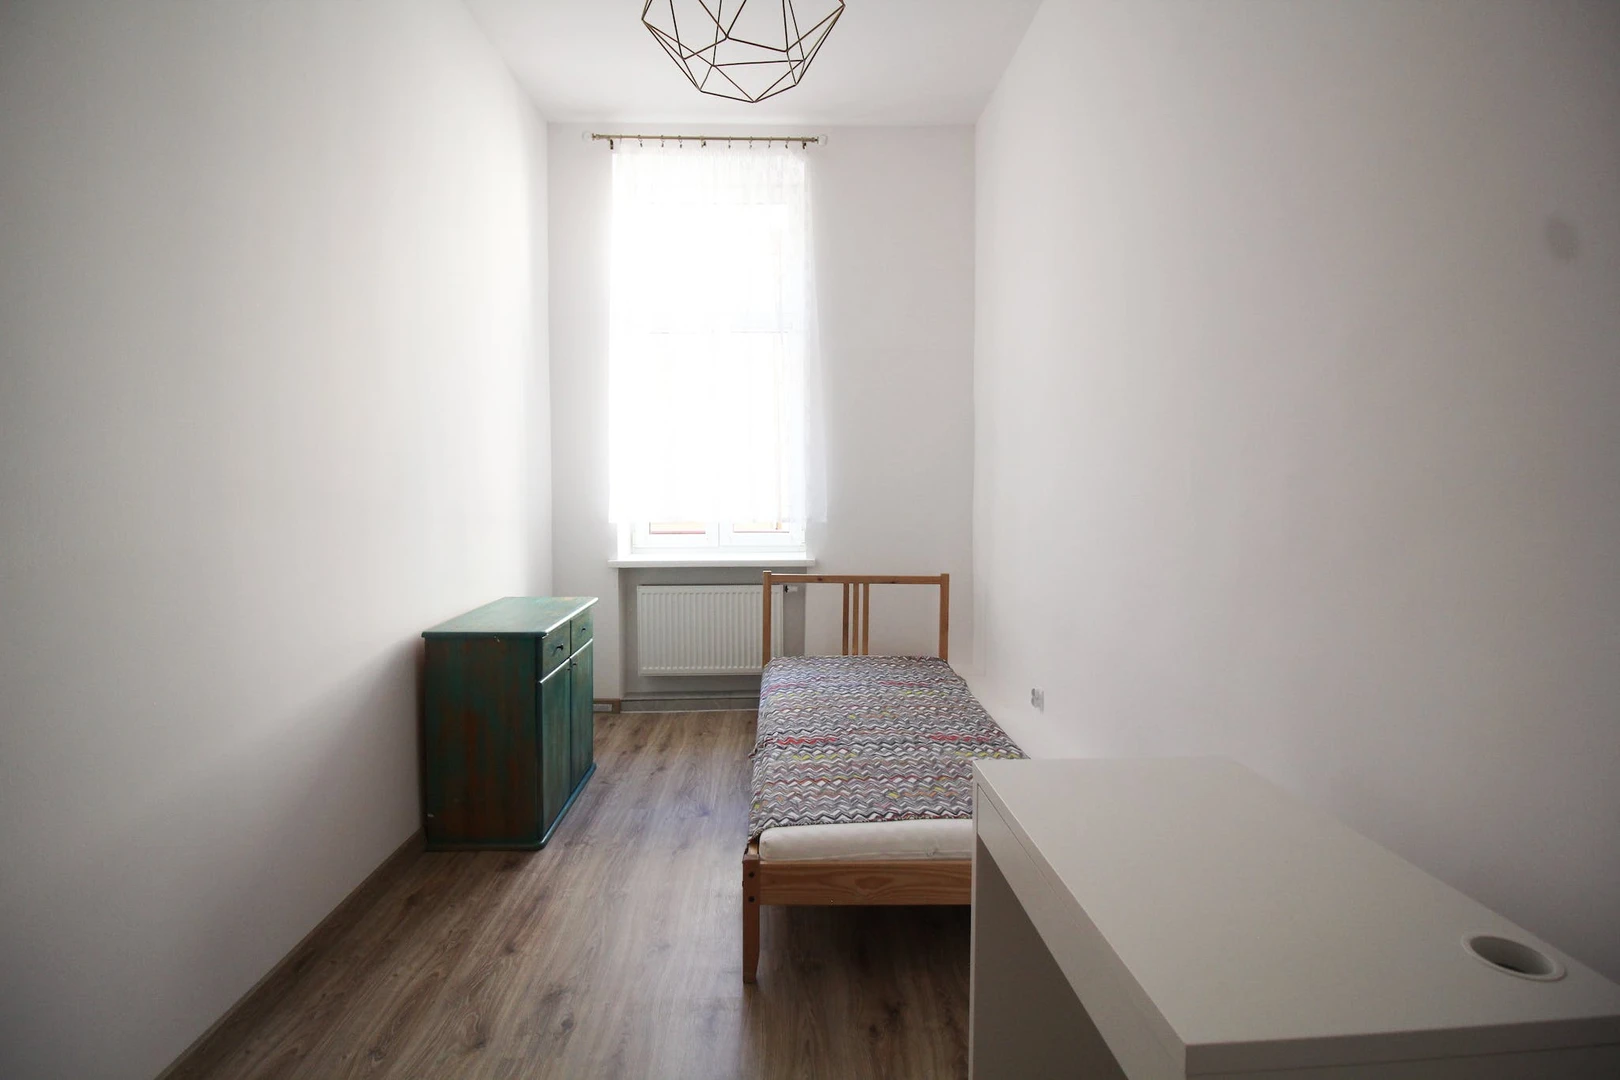 Room for rent in a shared flat in krakow